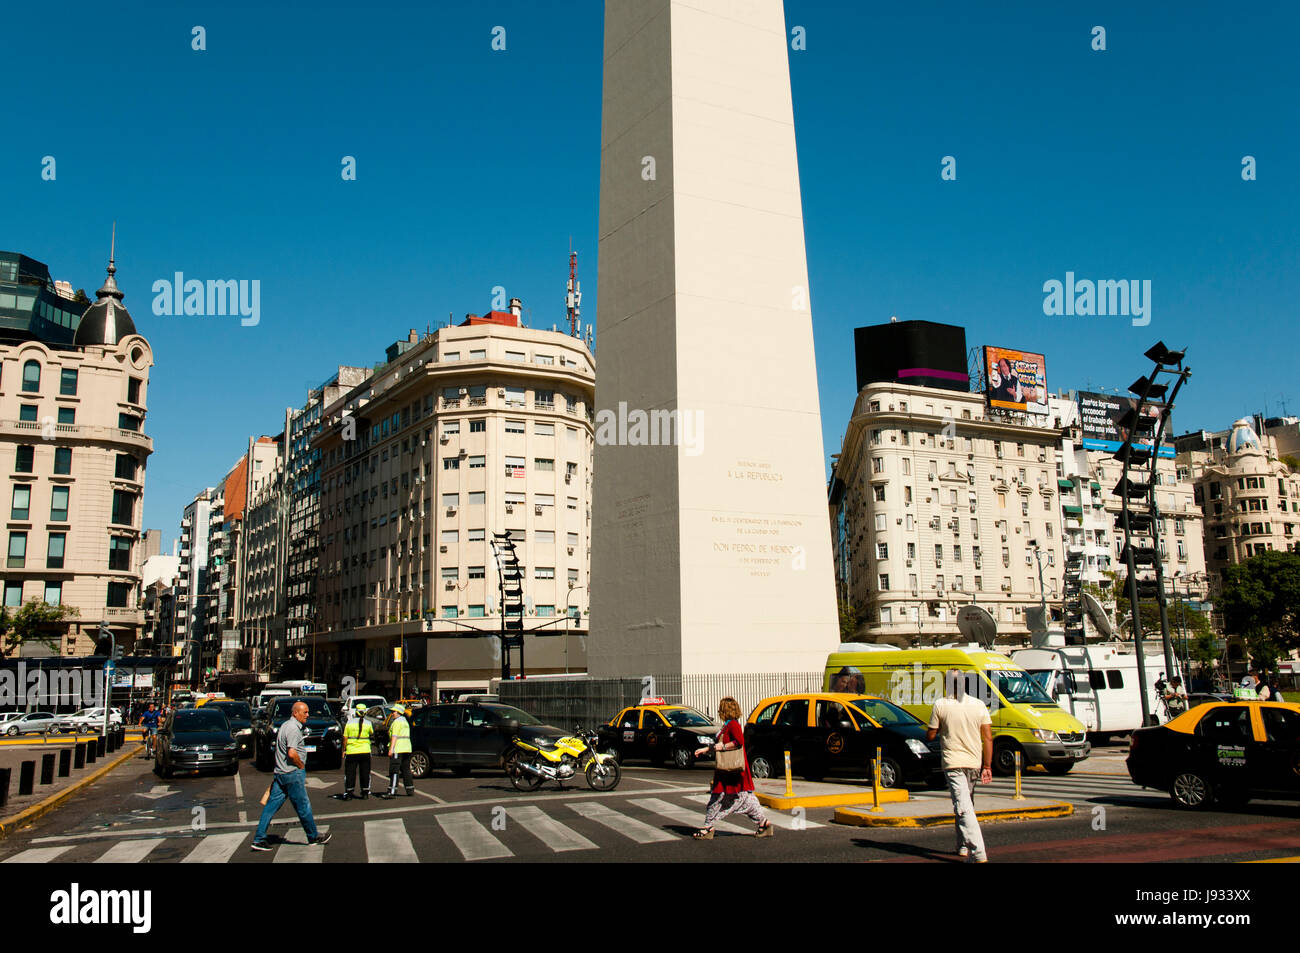 BUENOS AIRES, ARGENTINA - December 15, 2016: The Obelisk is the icon of Buenos Aires in the Plaza de la Republica built in 1936 Stock Photo